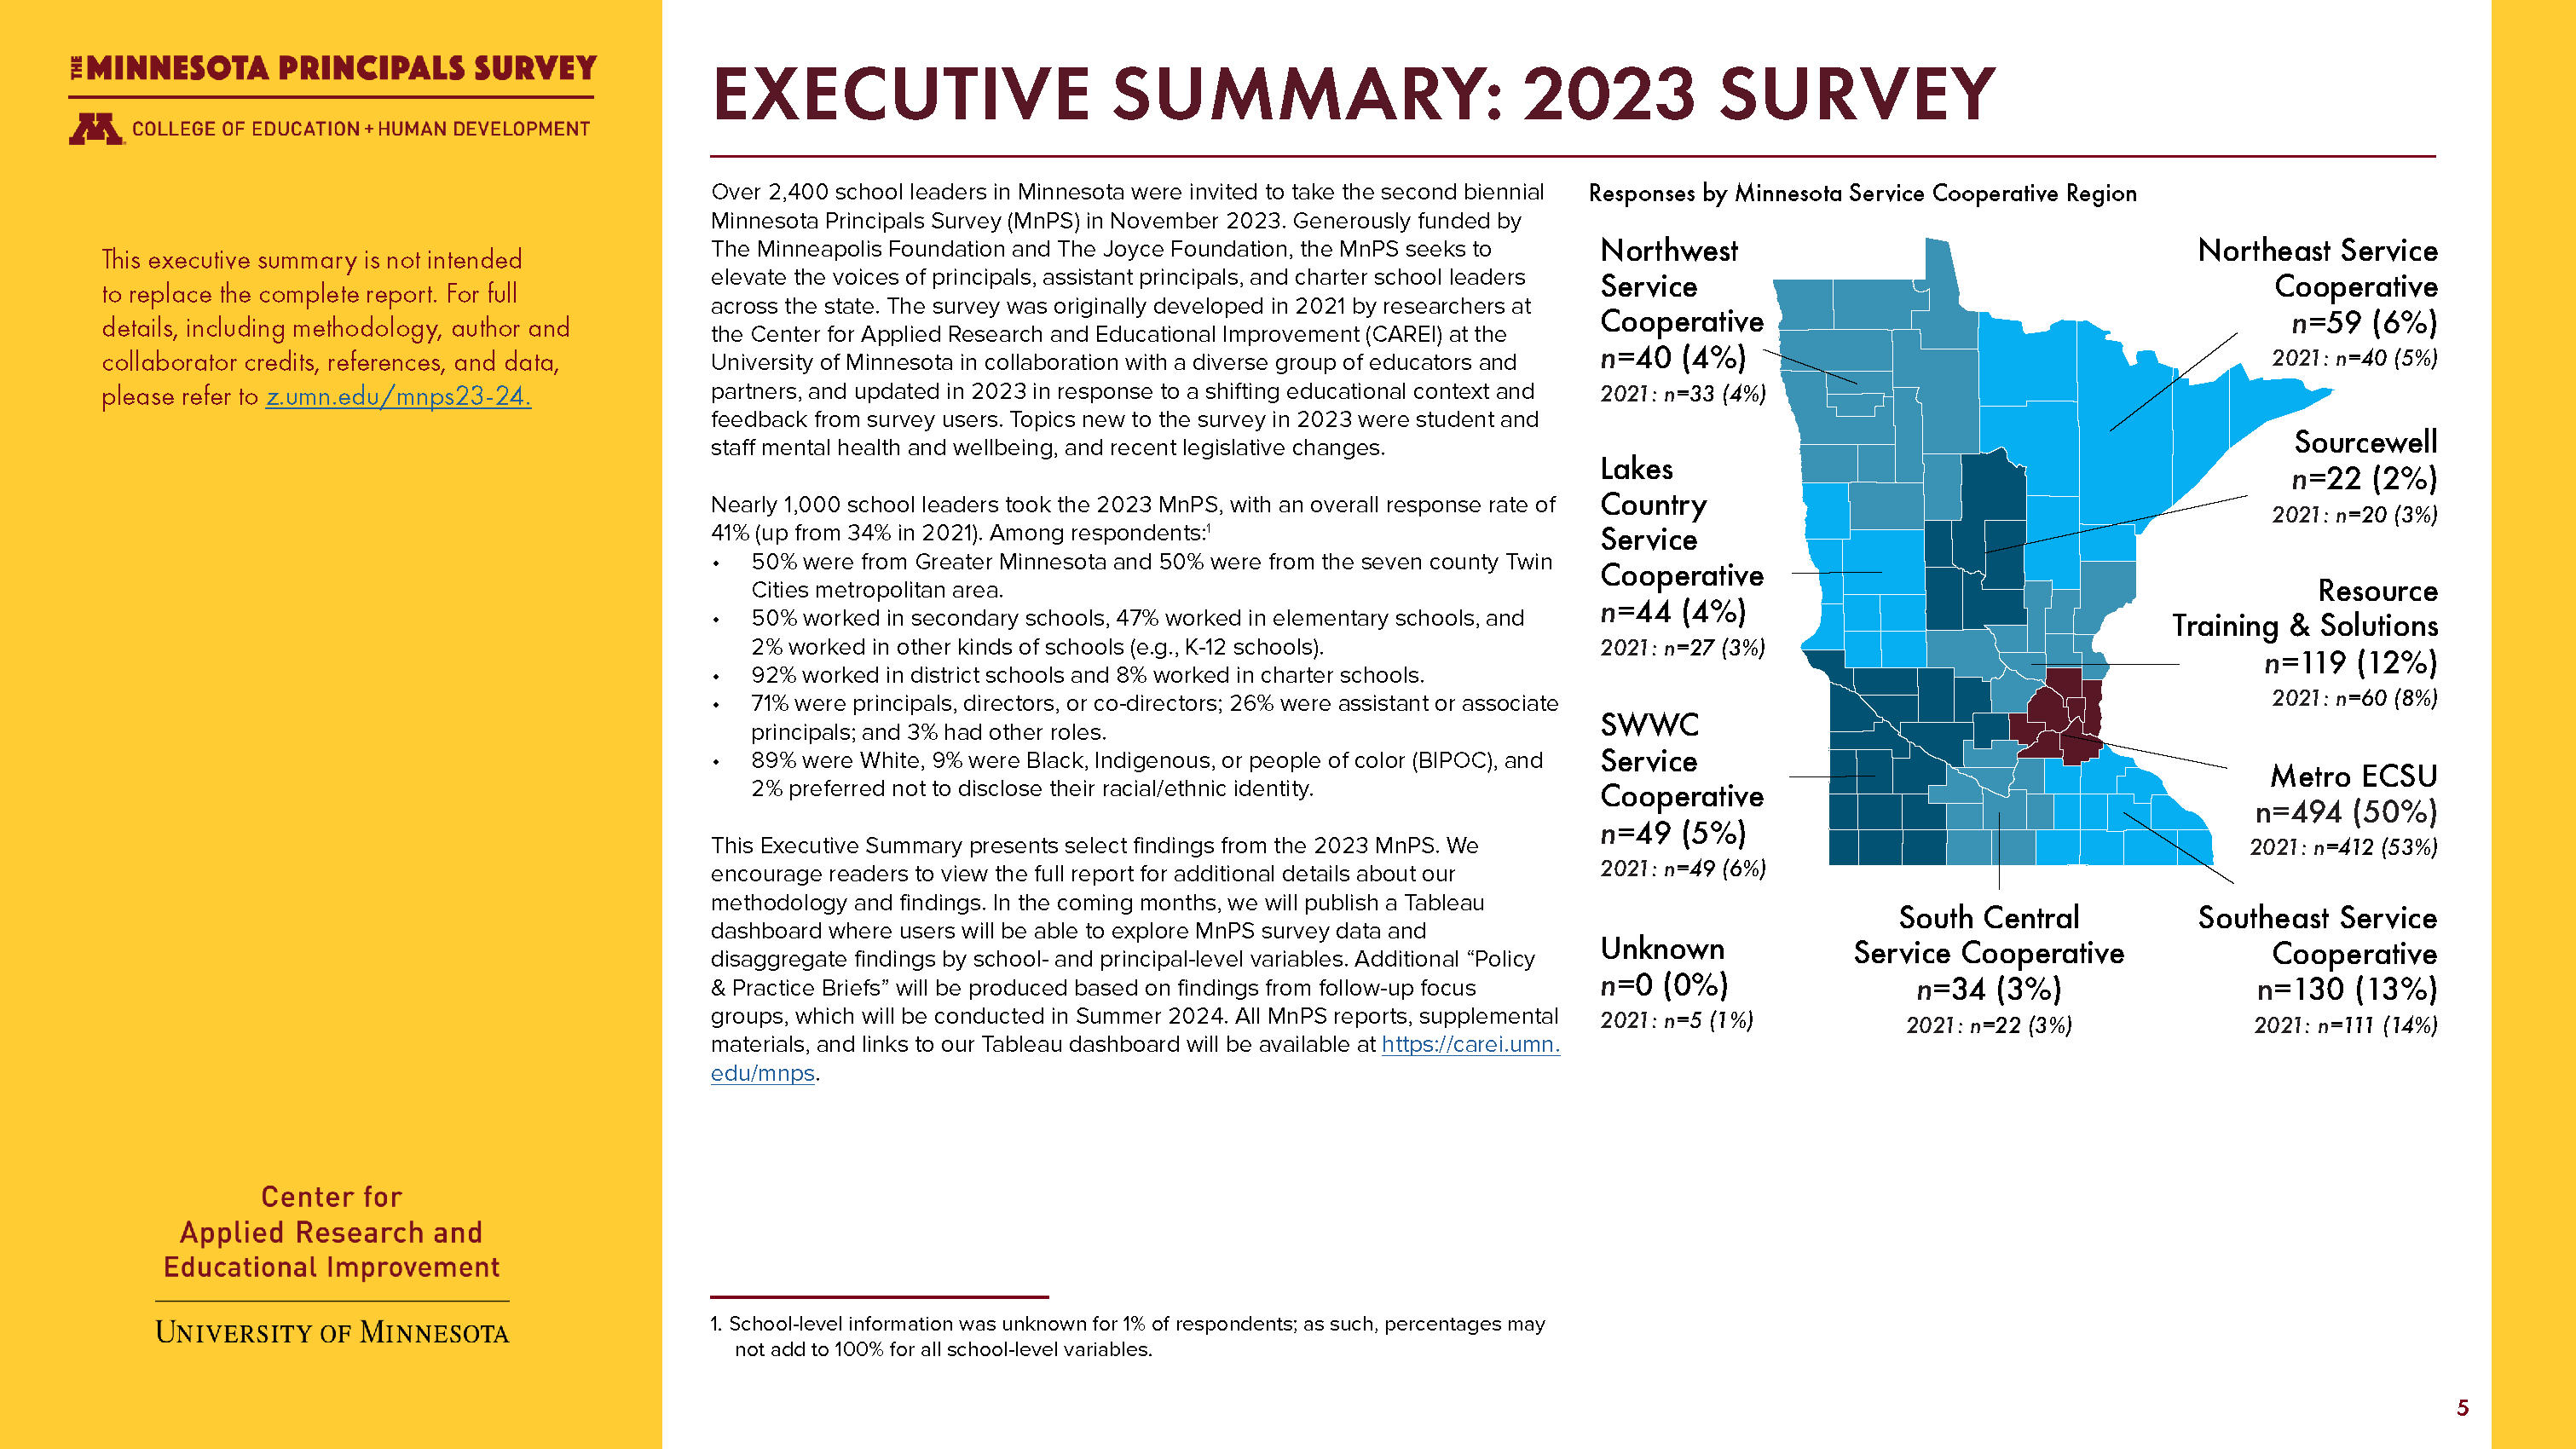 Image of cover page of 2023 Principals Survey executive summary report.